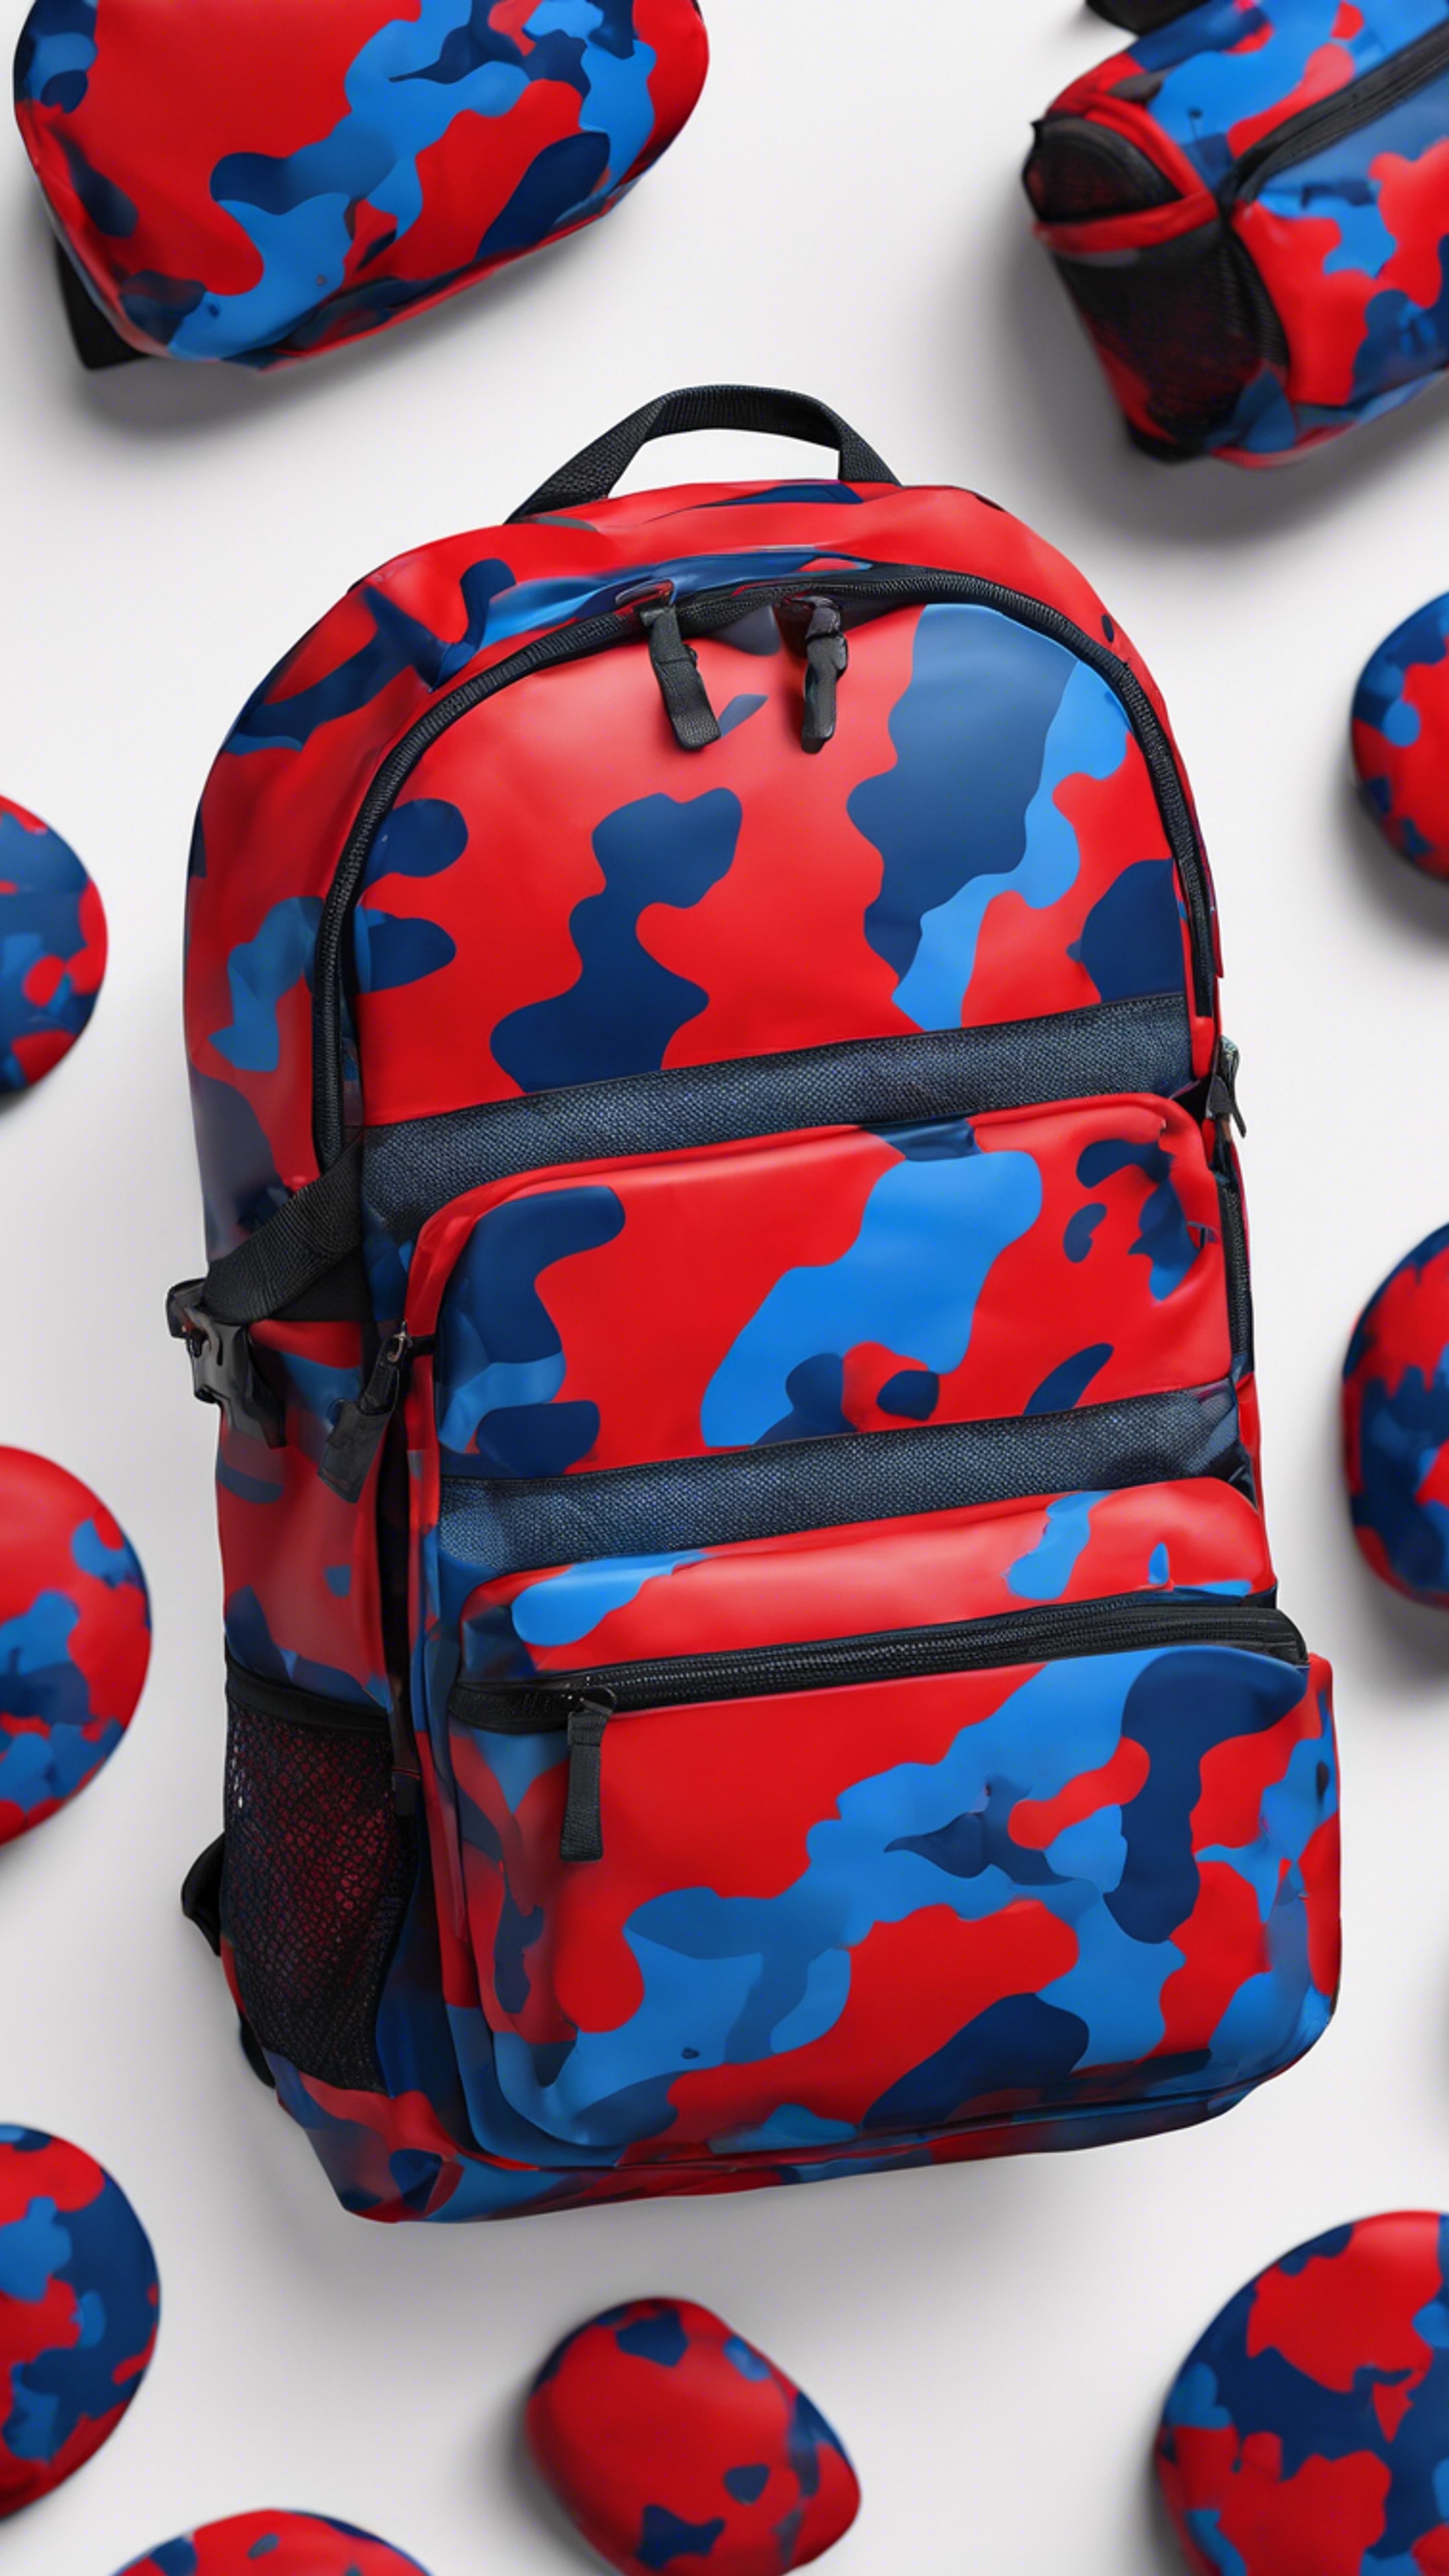 A seamless pattern of red and blue camouflage like on a sports backpack. Tapet[ebf2c58b20f943e08eab]